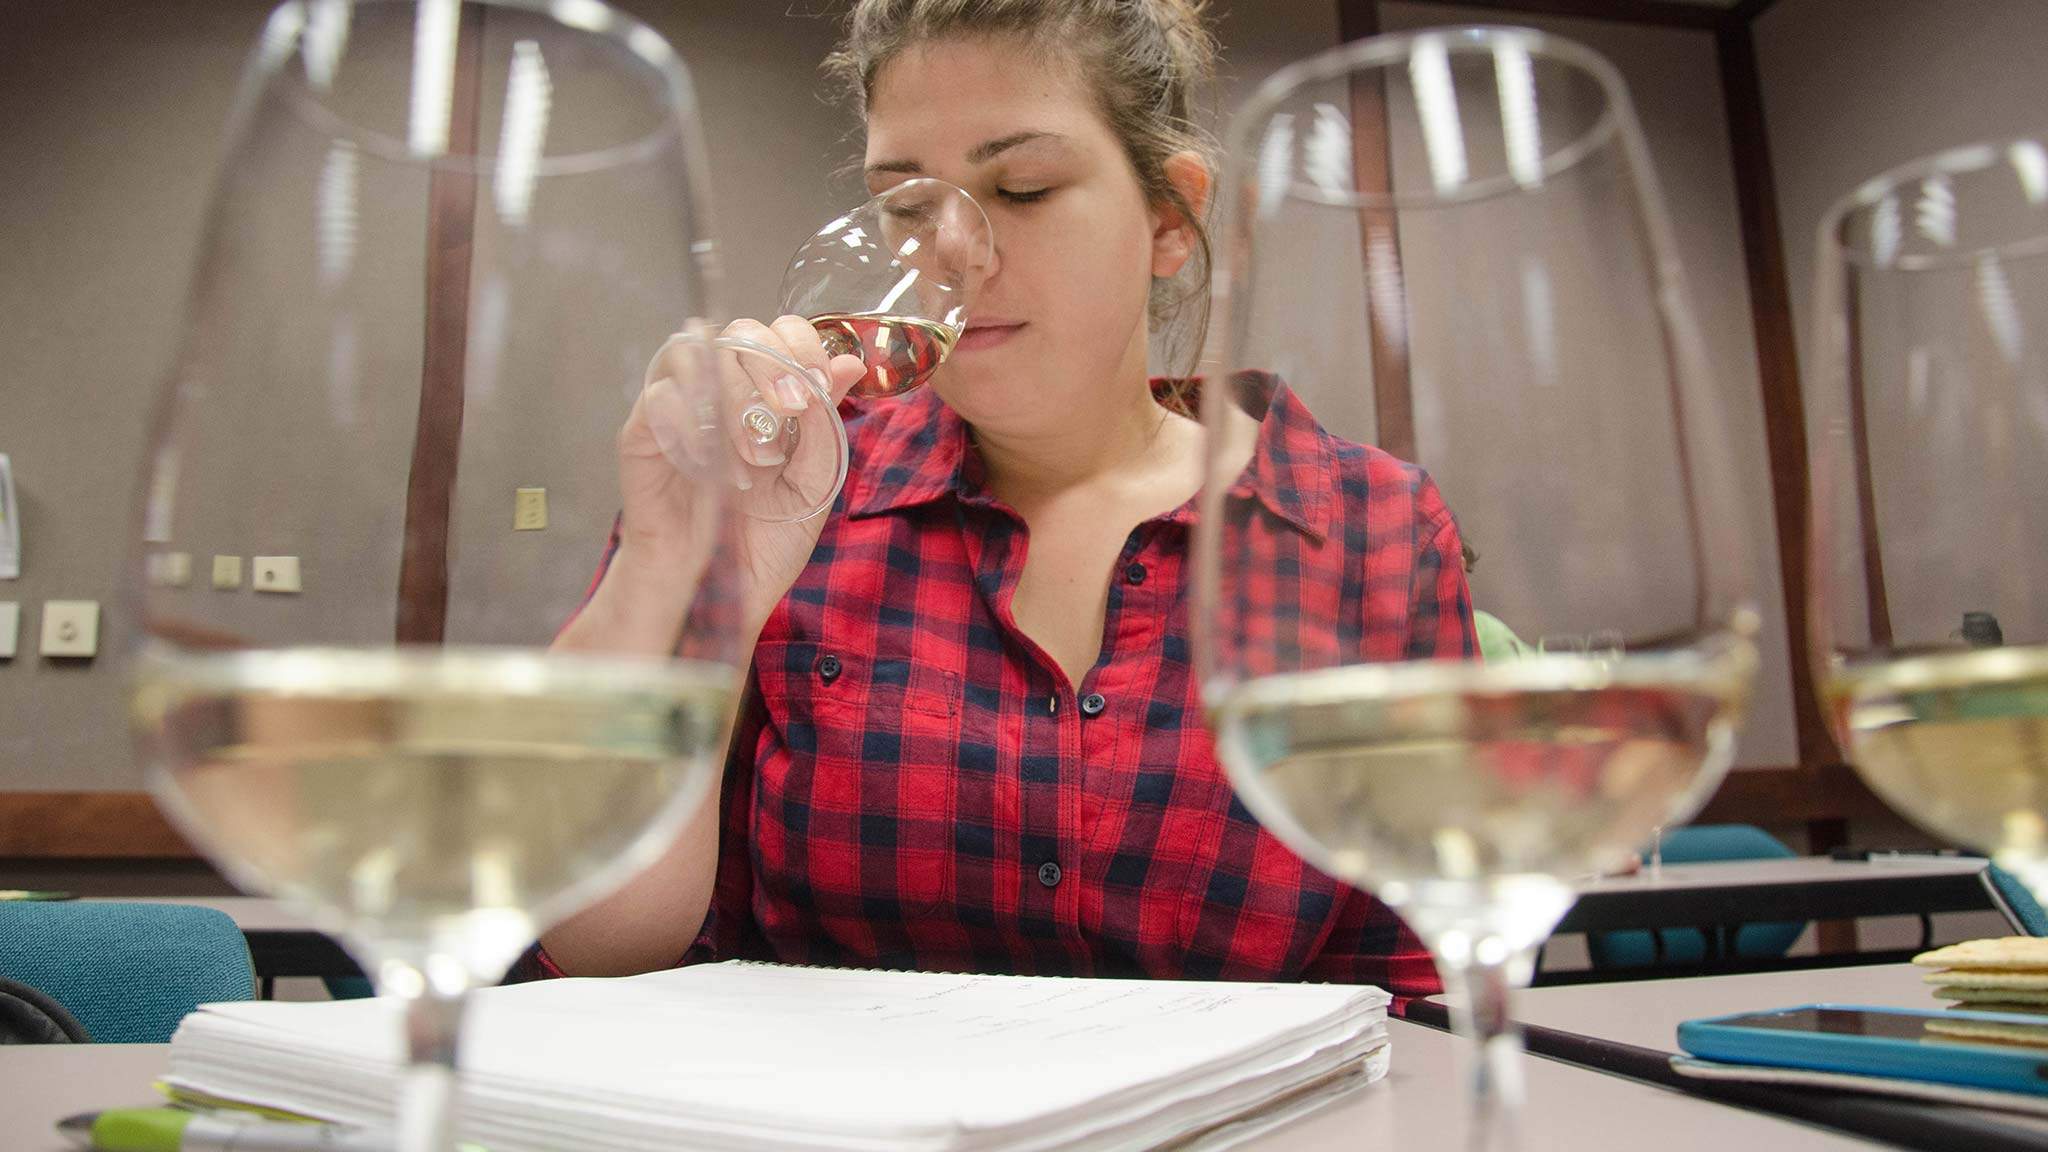 Wine student in the Classroom